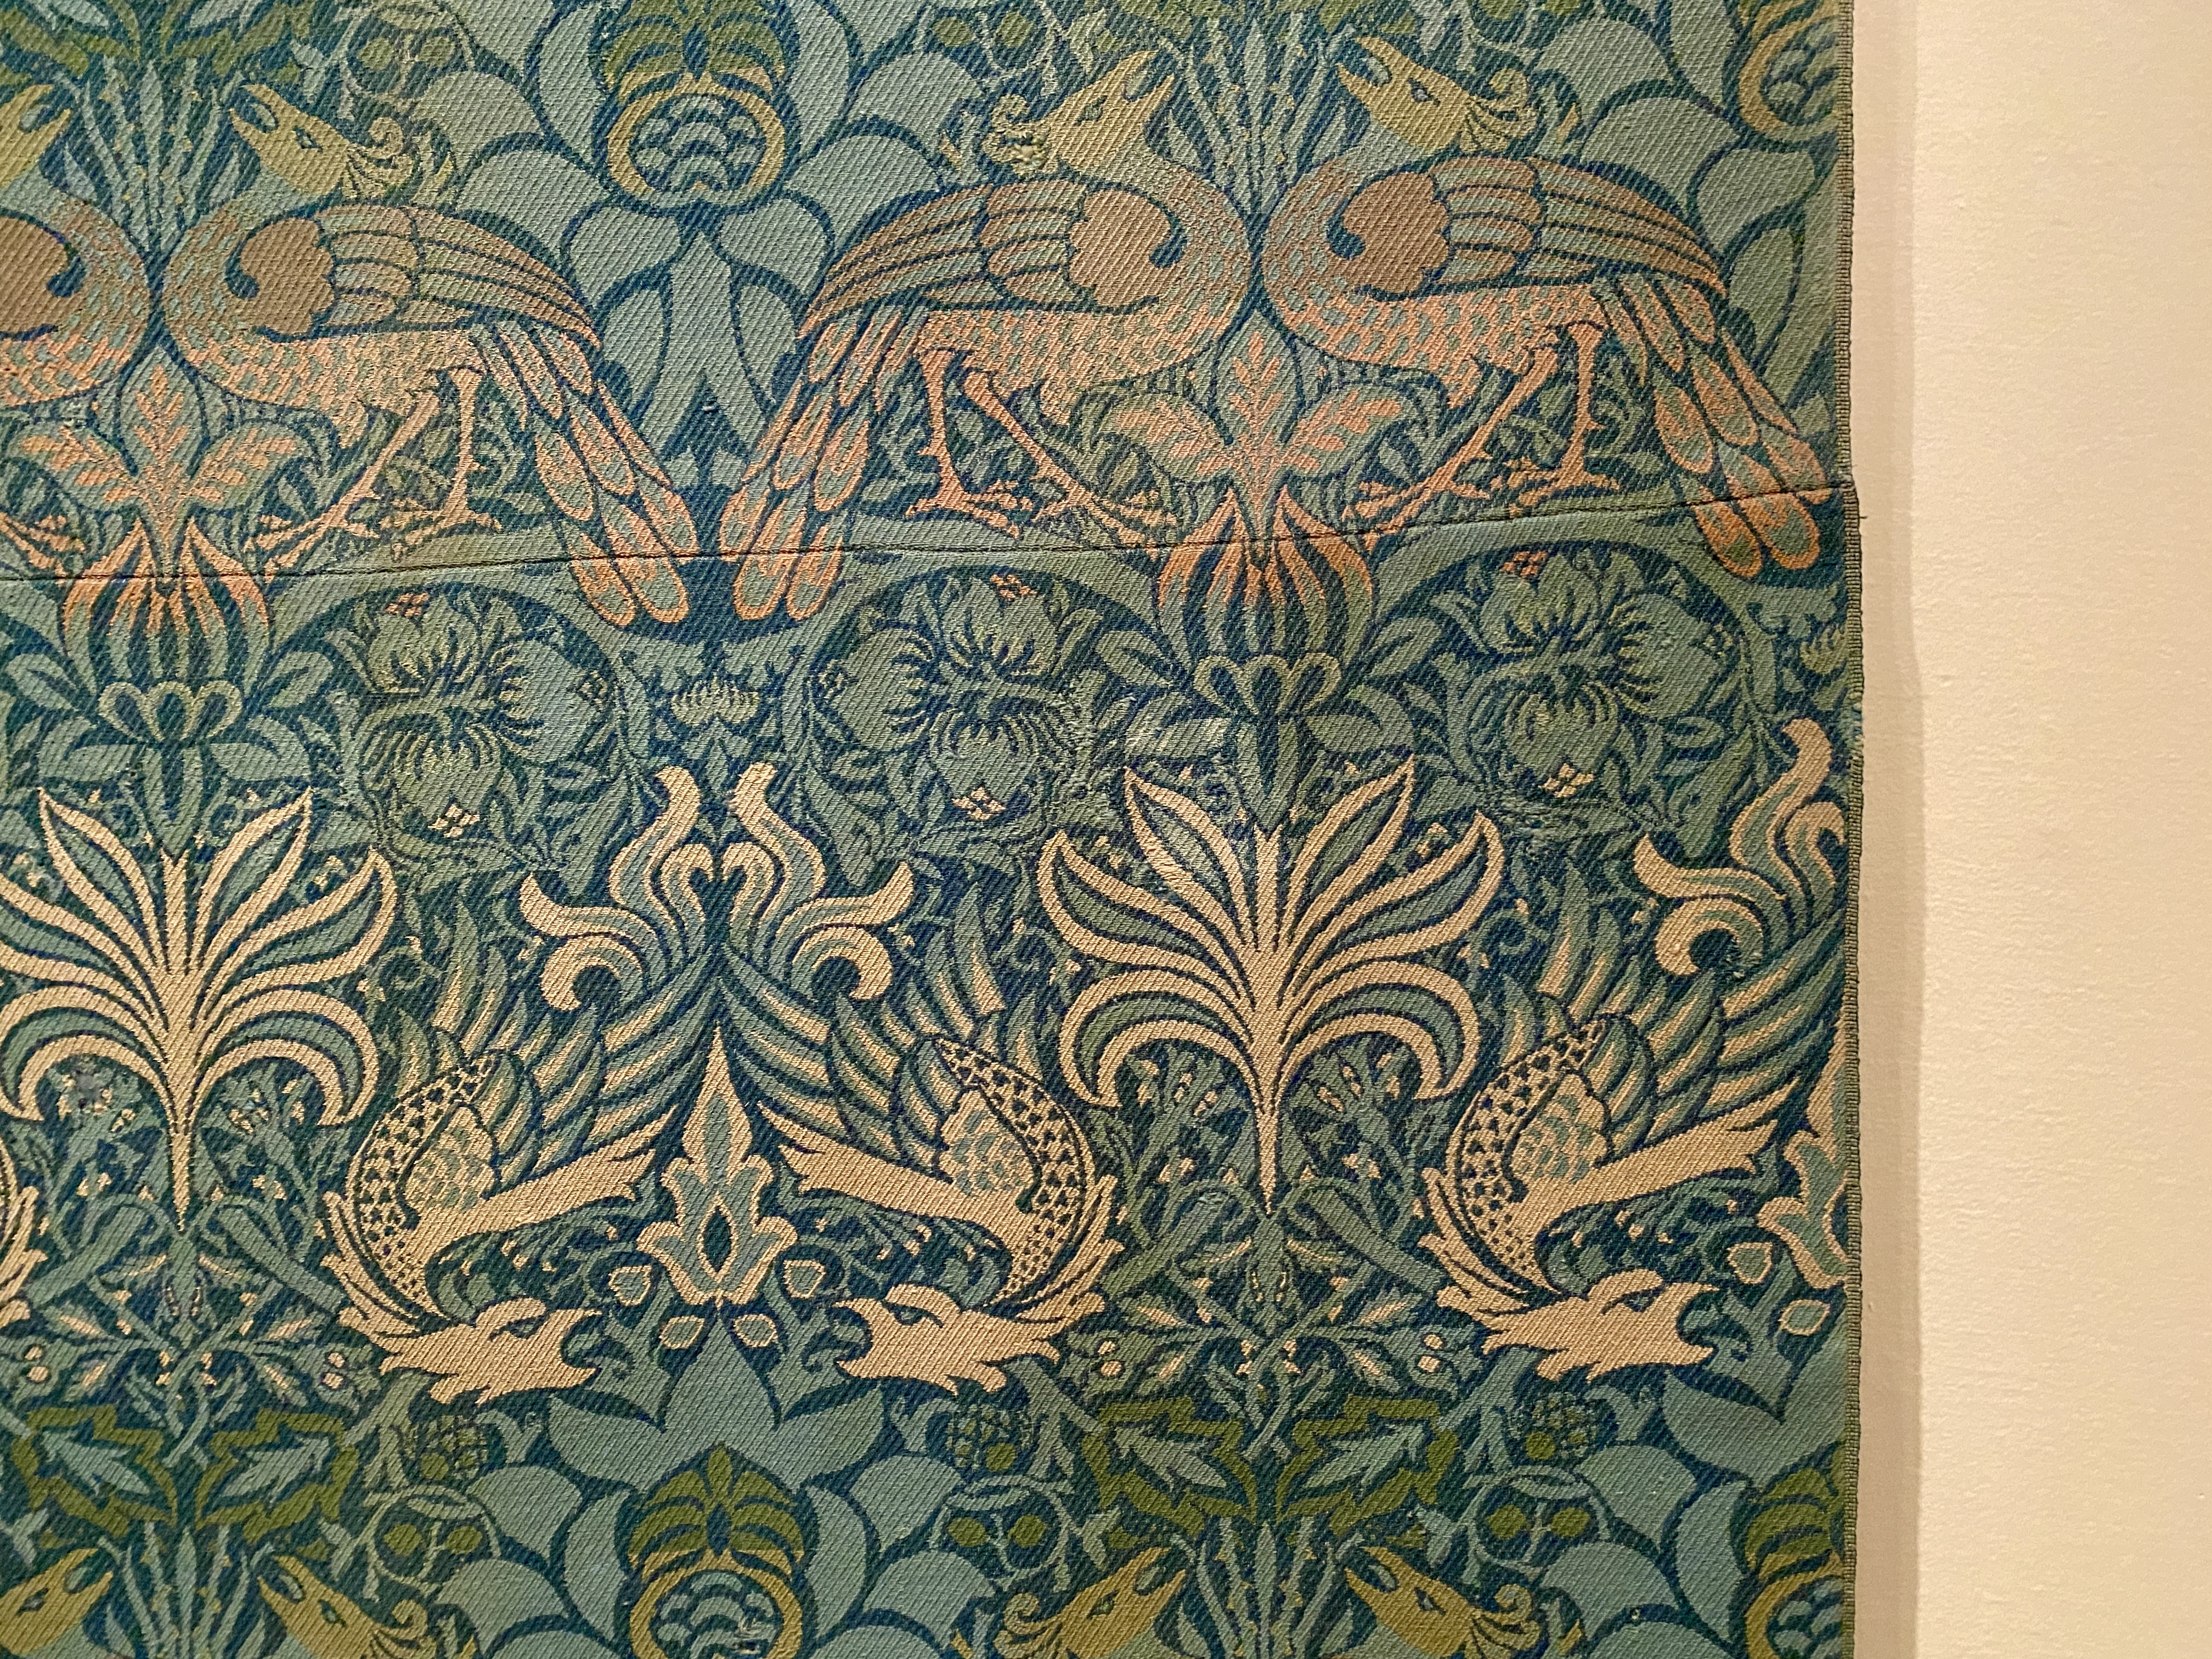 Portion of antique textile with a stylized repeating design of peacocks and dragons in turquoise, green and ivory